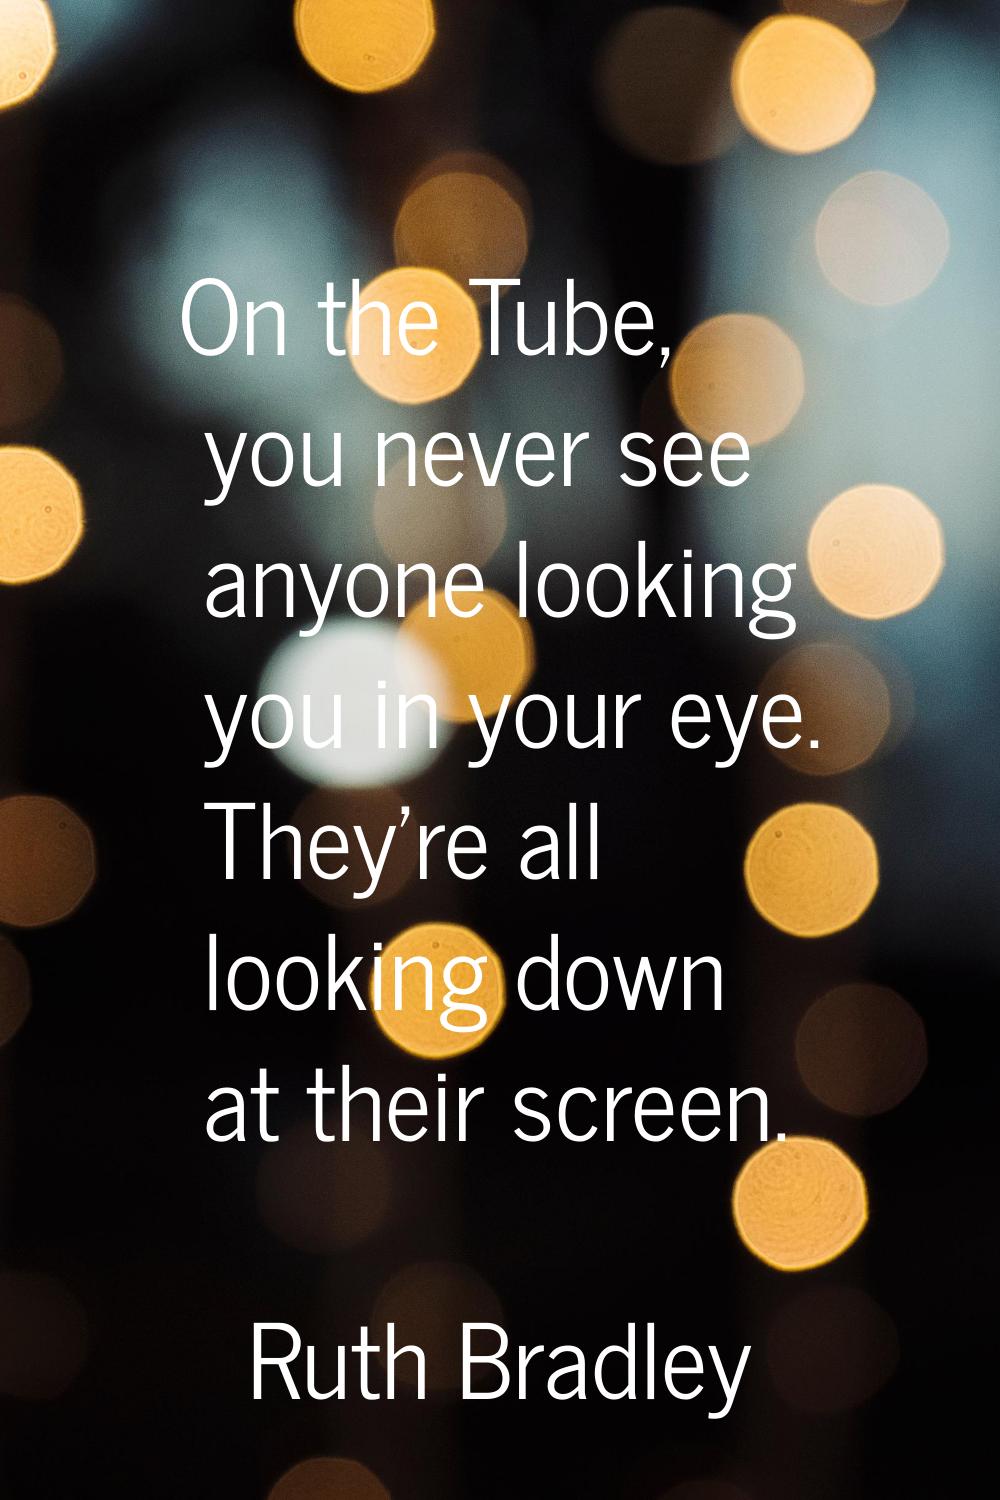 On the Tube, you never see anyone looking you in your eye. They're all looking down at their screen